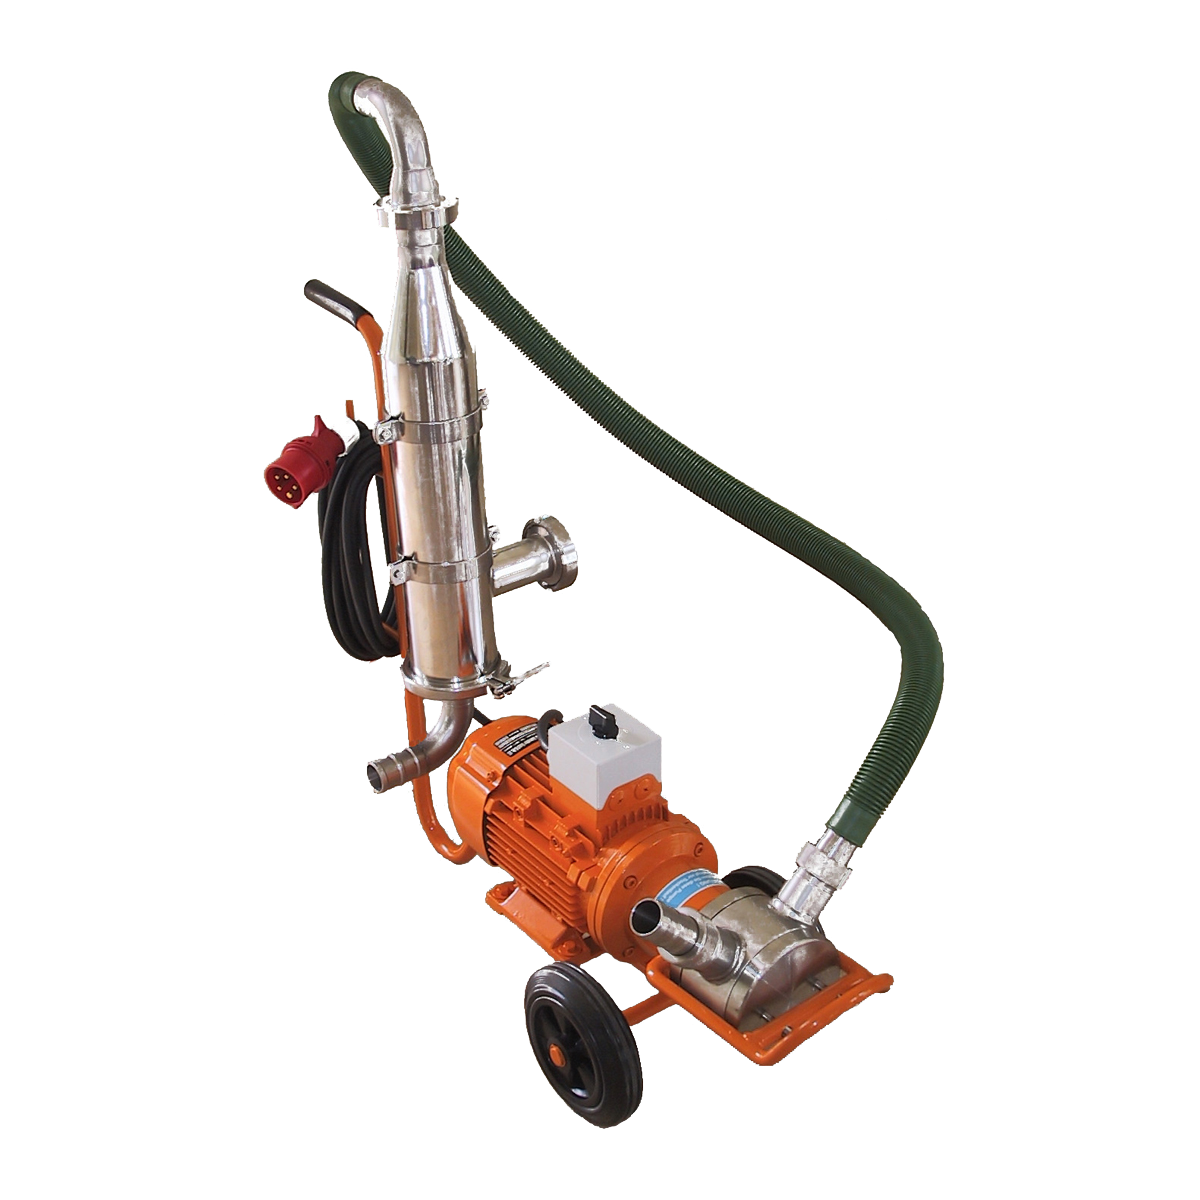 Ocean Impeller pump 8000 220V, 8000 l/h, 4 bar, 2,2 kW incl. trolley, on and off protection switch Ocean Impeller pump 8000 220V, 8000 l/h, 4 bar, 2,2 kW incl. trolley, on and off protection switch